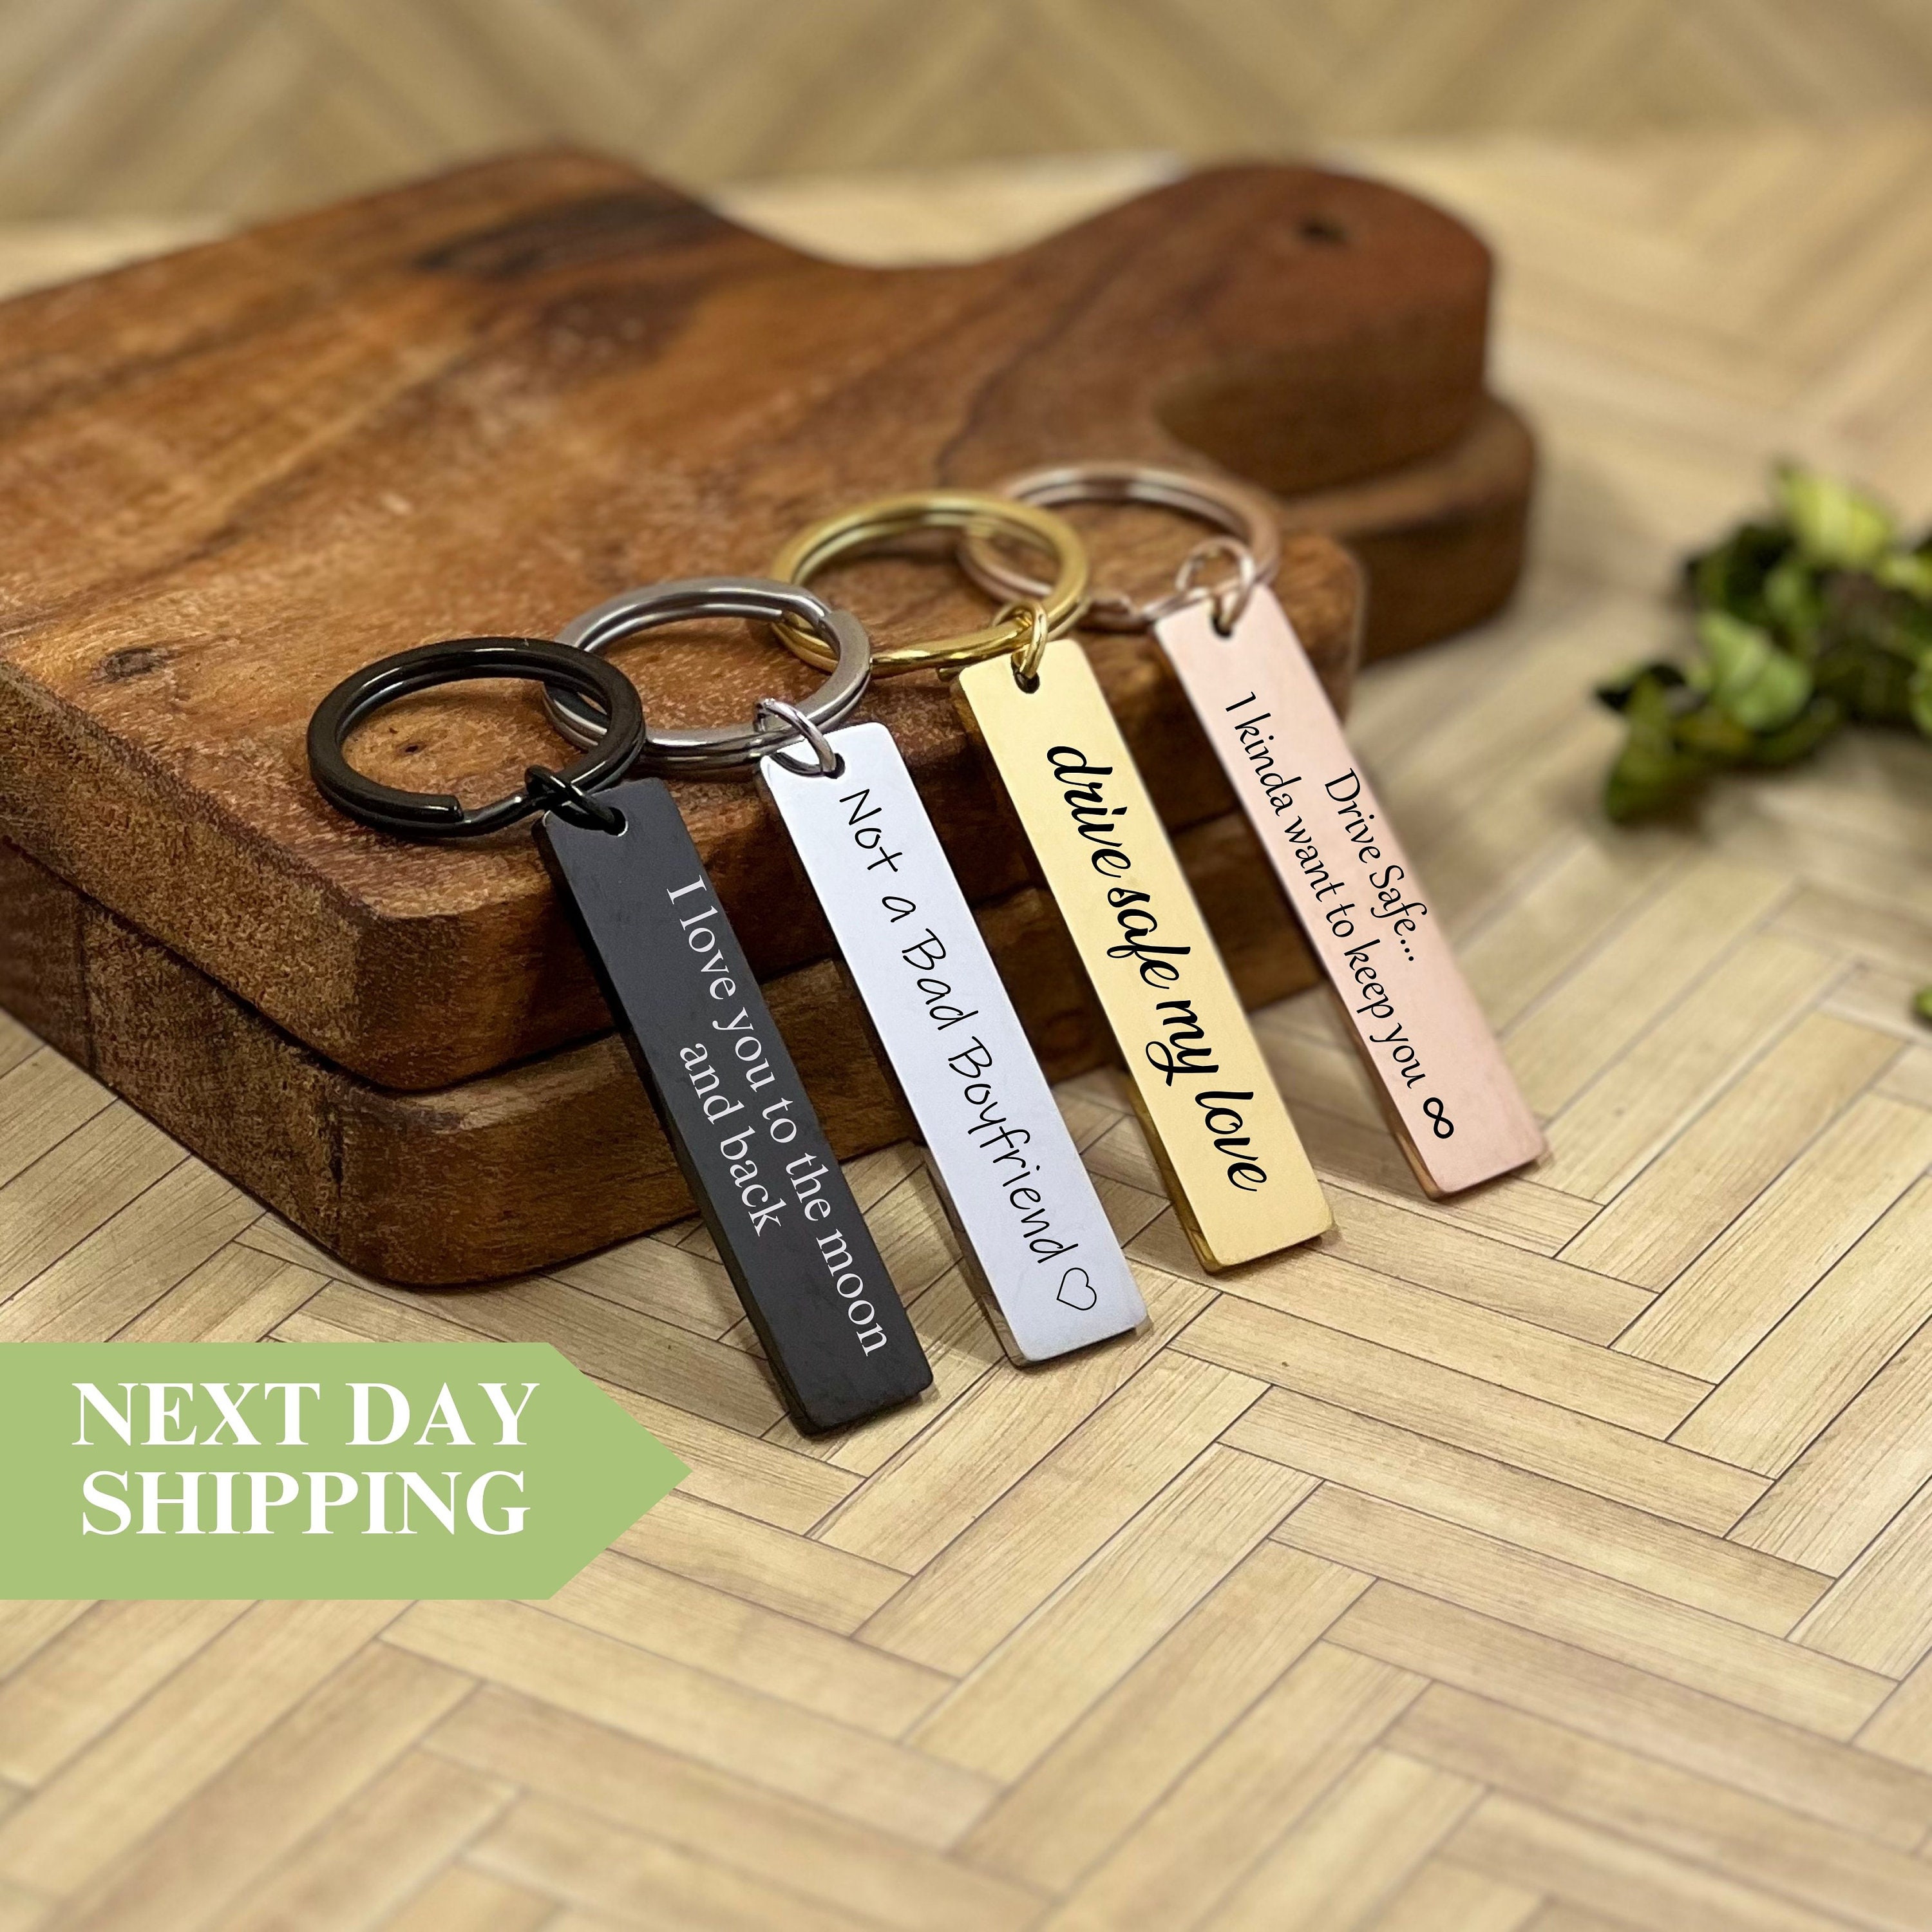 Luxury Handmade Leather Black Keychain With Designer P Car Key Buckle For  Women And Men Black Bag Pendant Jewelry Keyring From Fashion_cap, $17.96